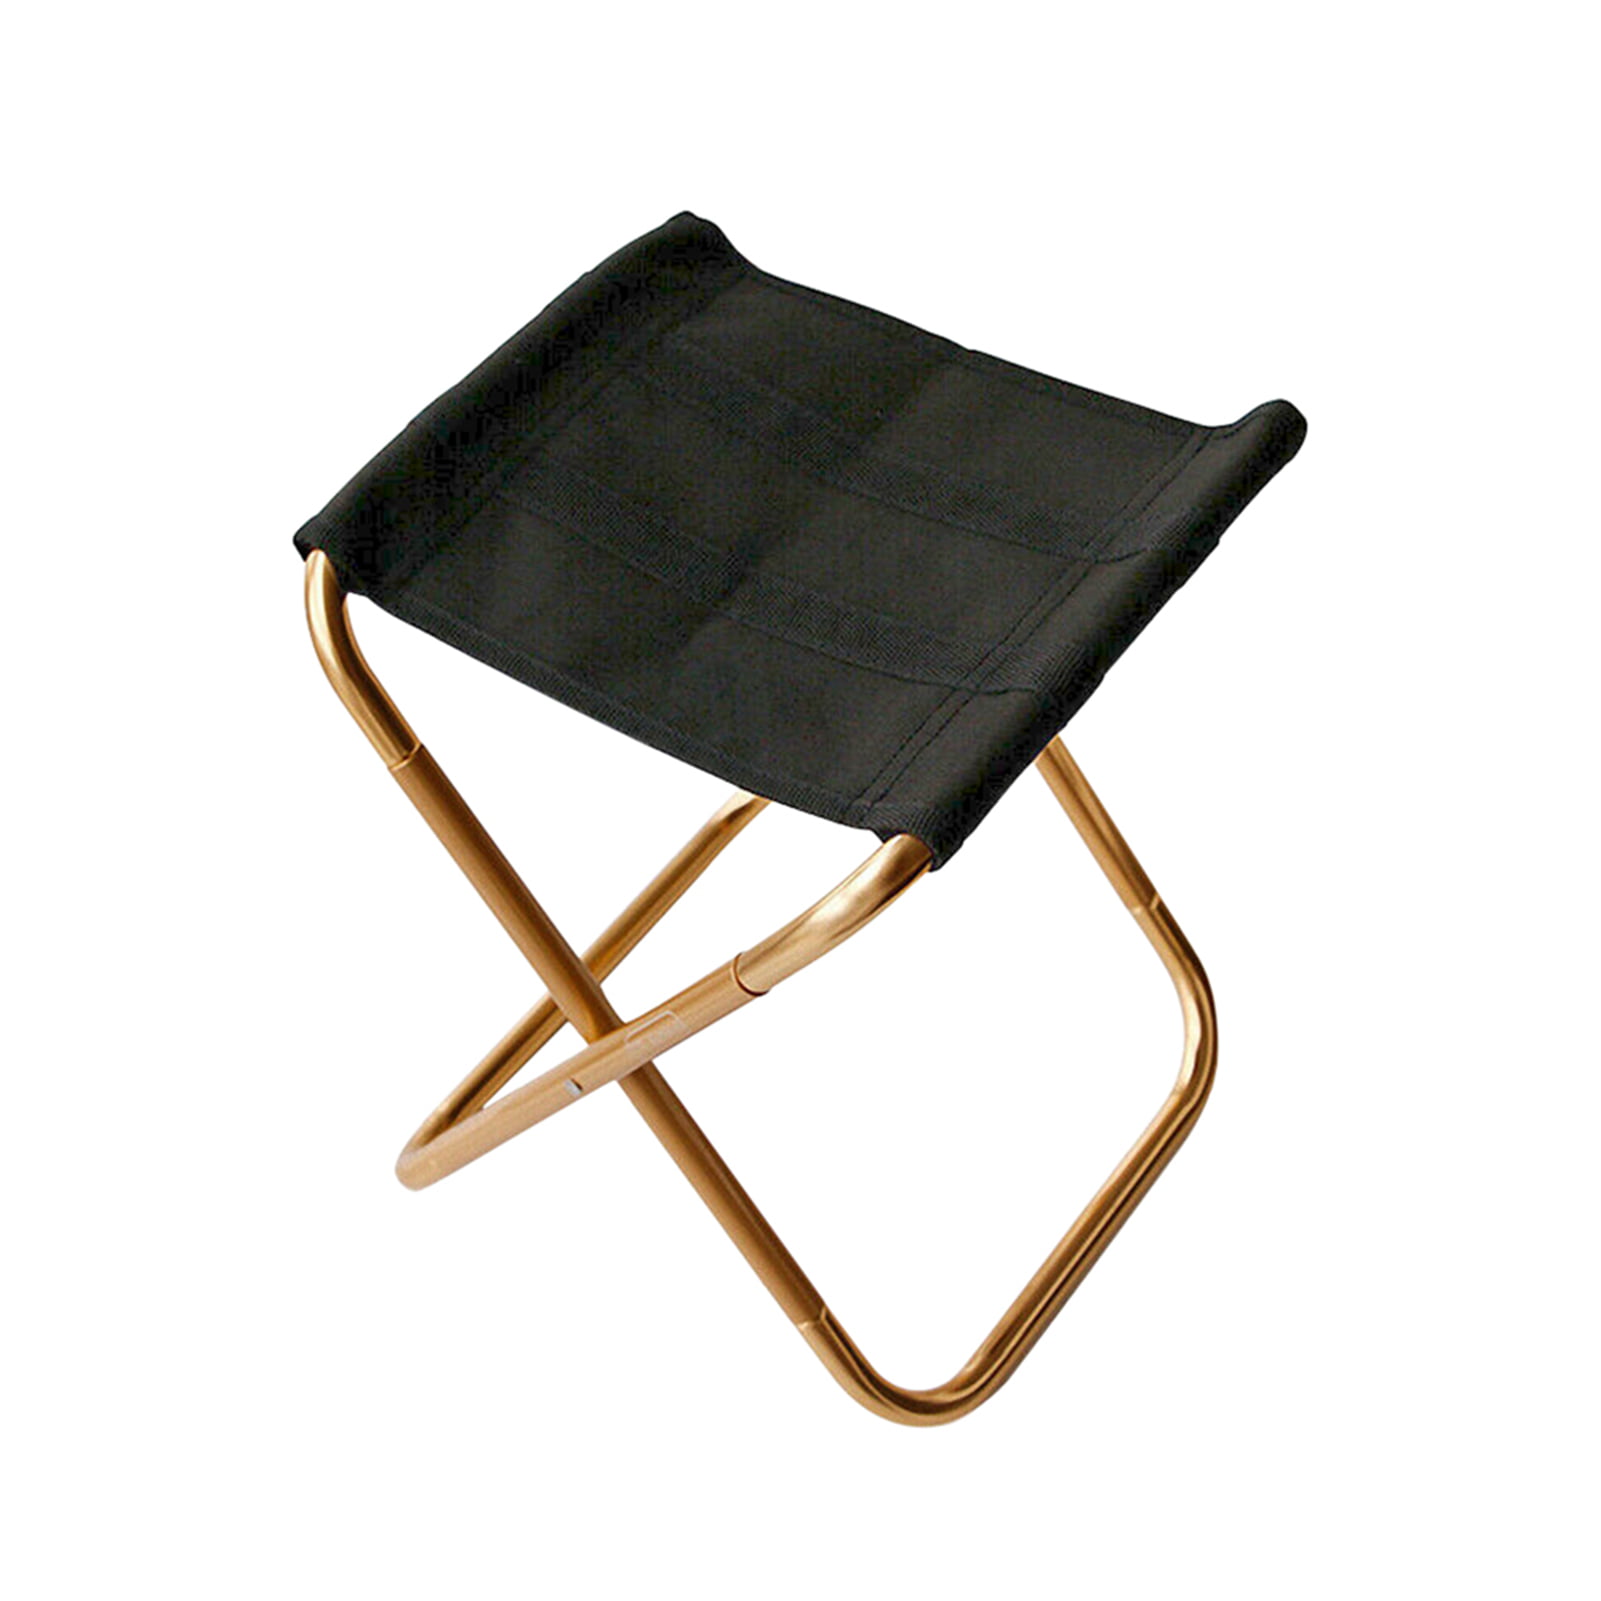 Details about   Outdoor Aluminium Alloy Folding Stool Portable Mini Fishing Camping